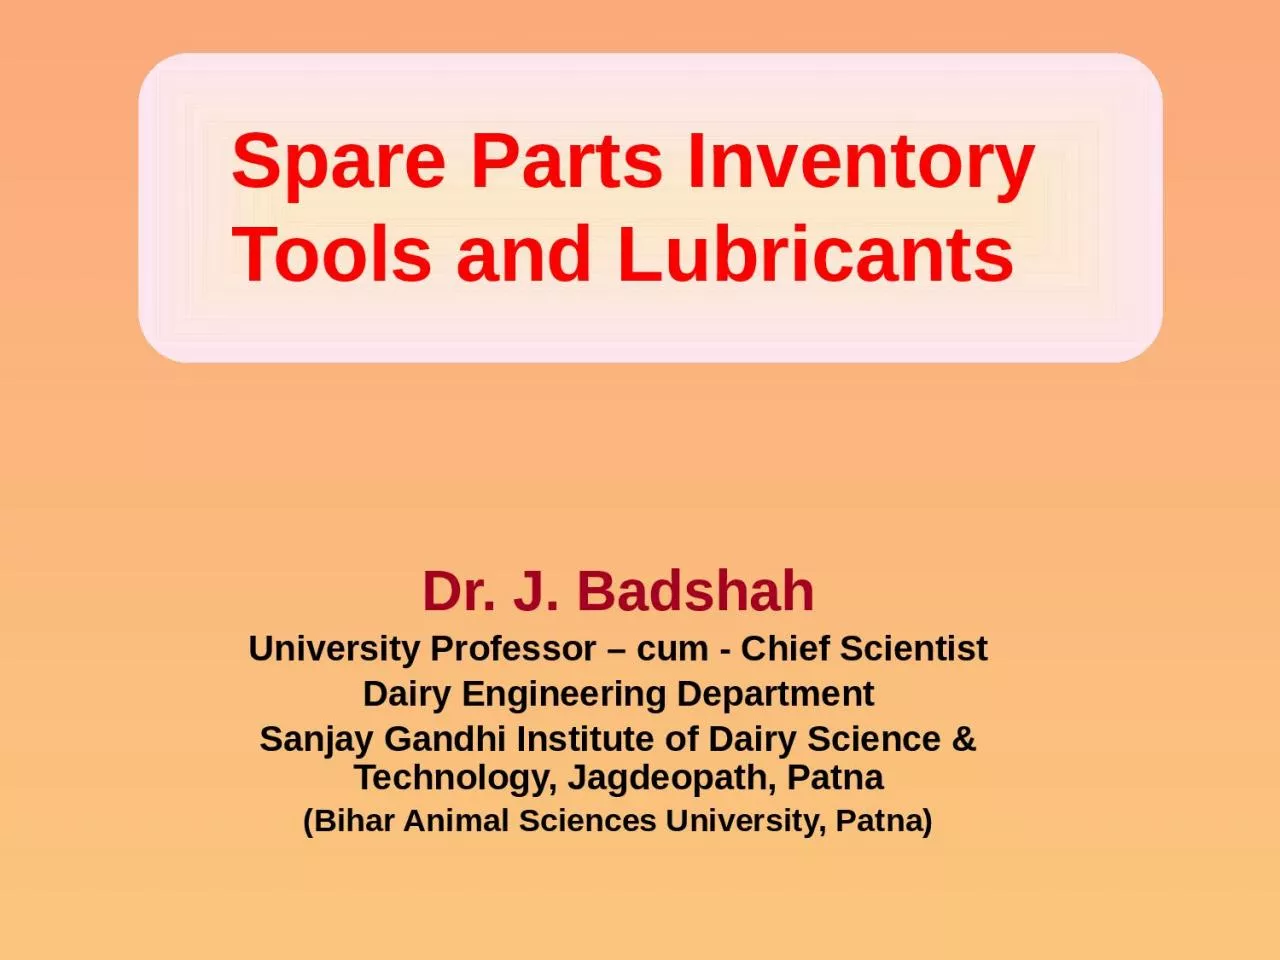 Spare Parts Inventory Tools and Lubricants